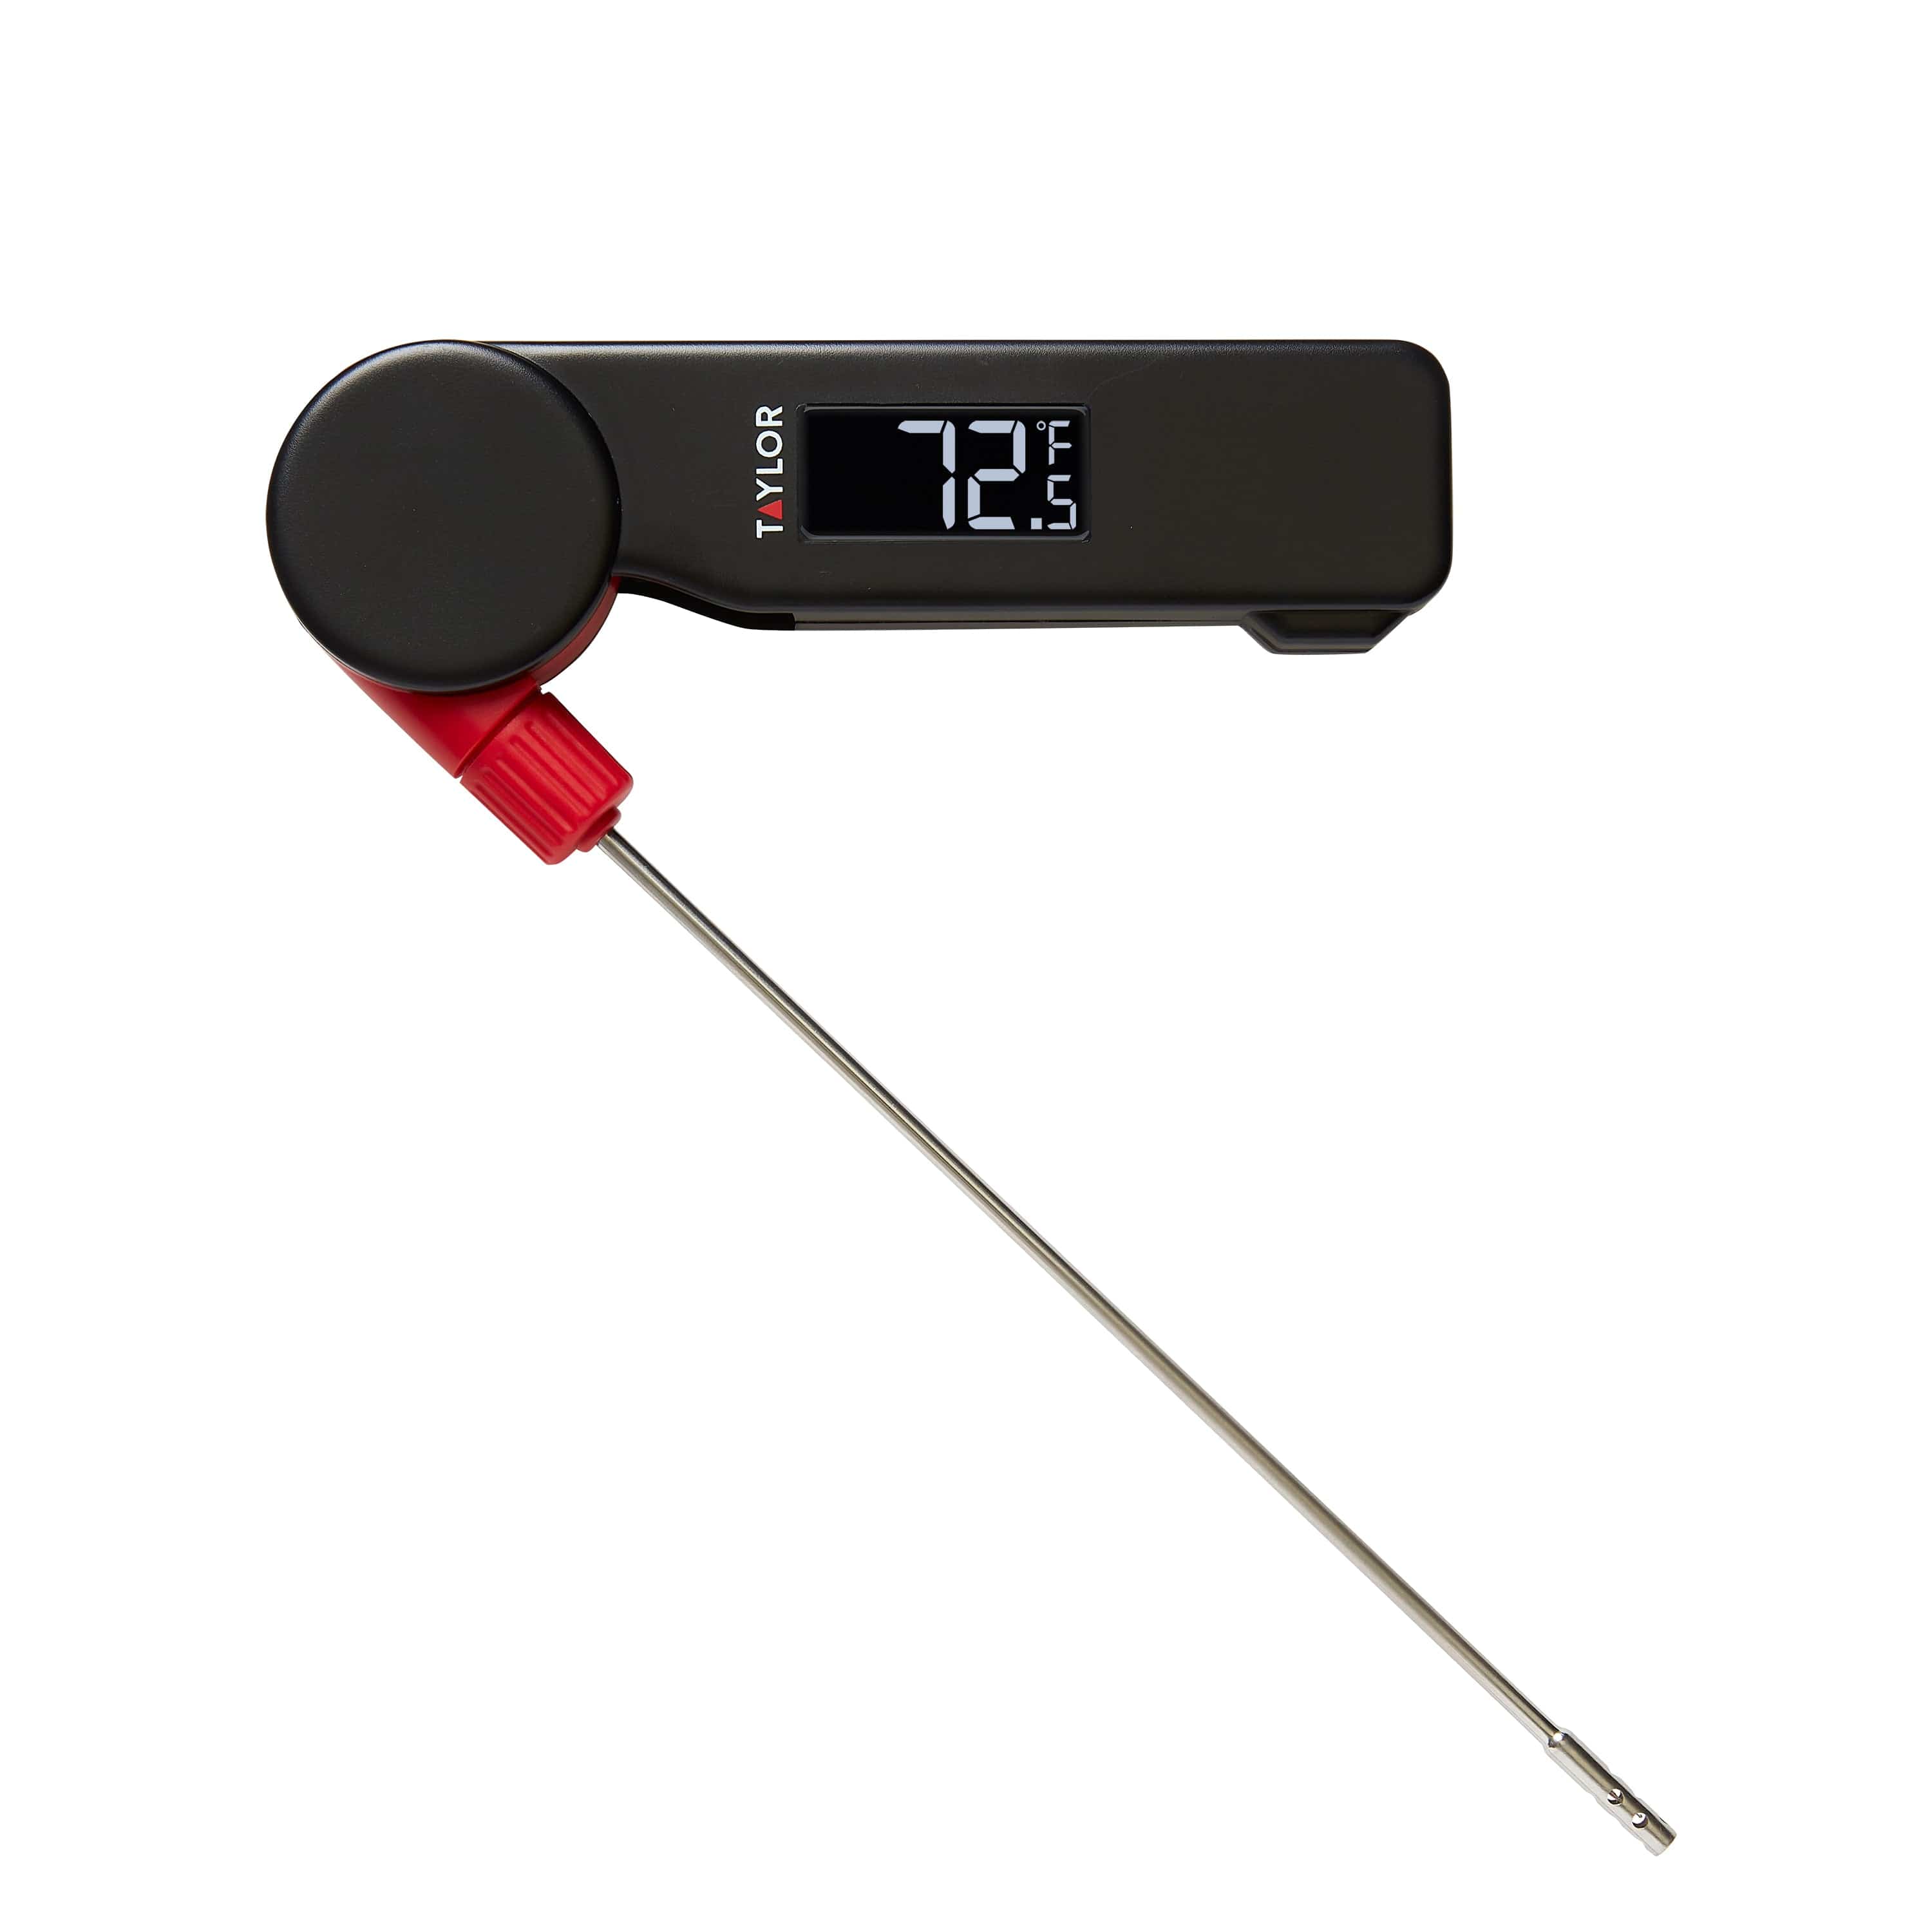 Taylor Digital Fold Thermocouple Thermometer Stainless Steel Probe Black 